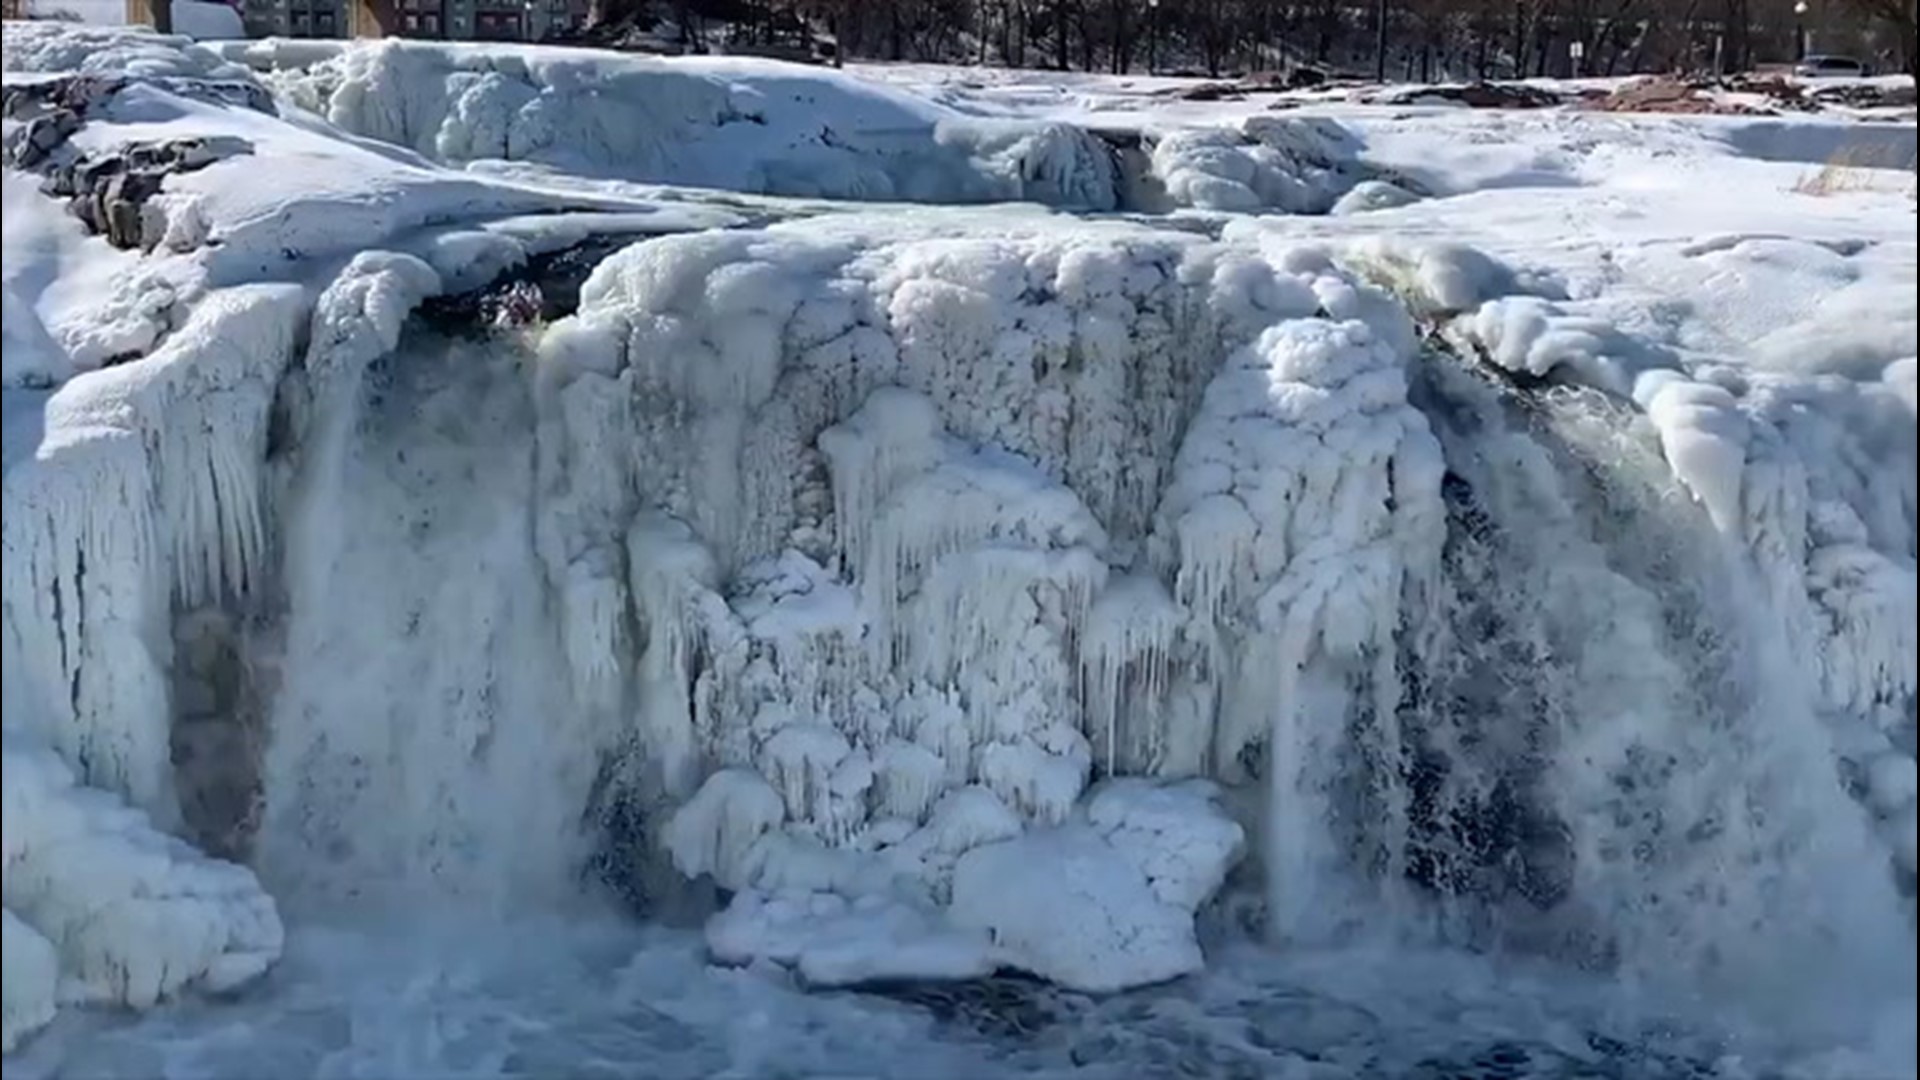 Frigid temperatures partially froze this waterfall at Falls Park in Sioux Falls, South Dakota, on Feb. 14.